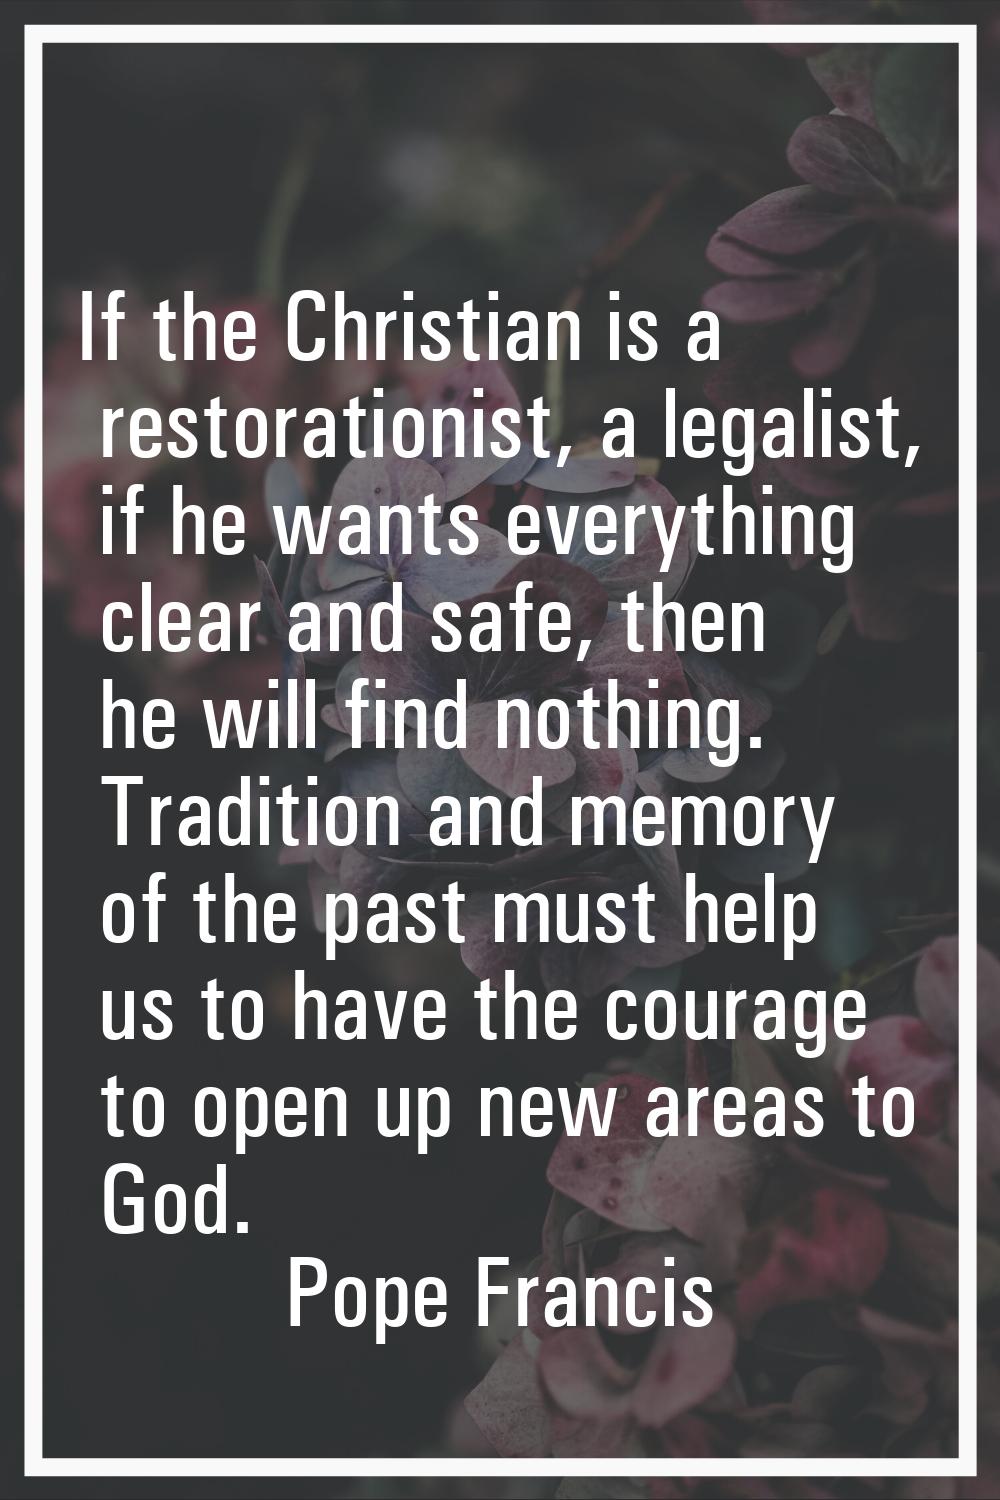 If the Christian is a restorationist, a legalist, if he wants everything clear and safe, then he wi